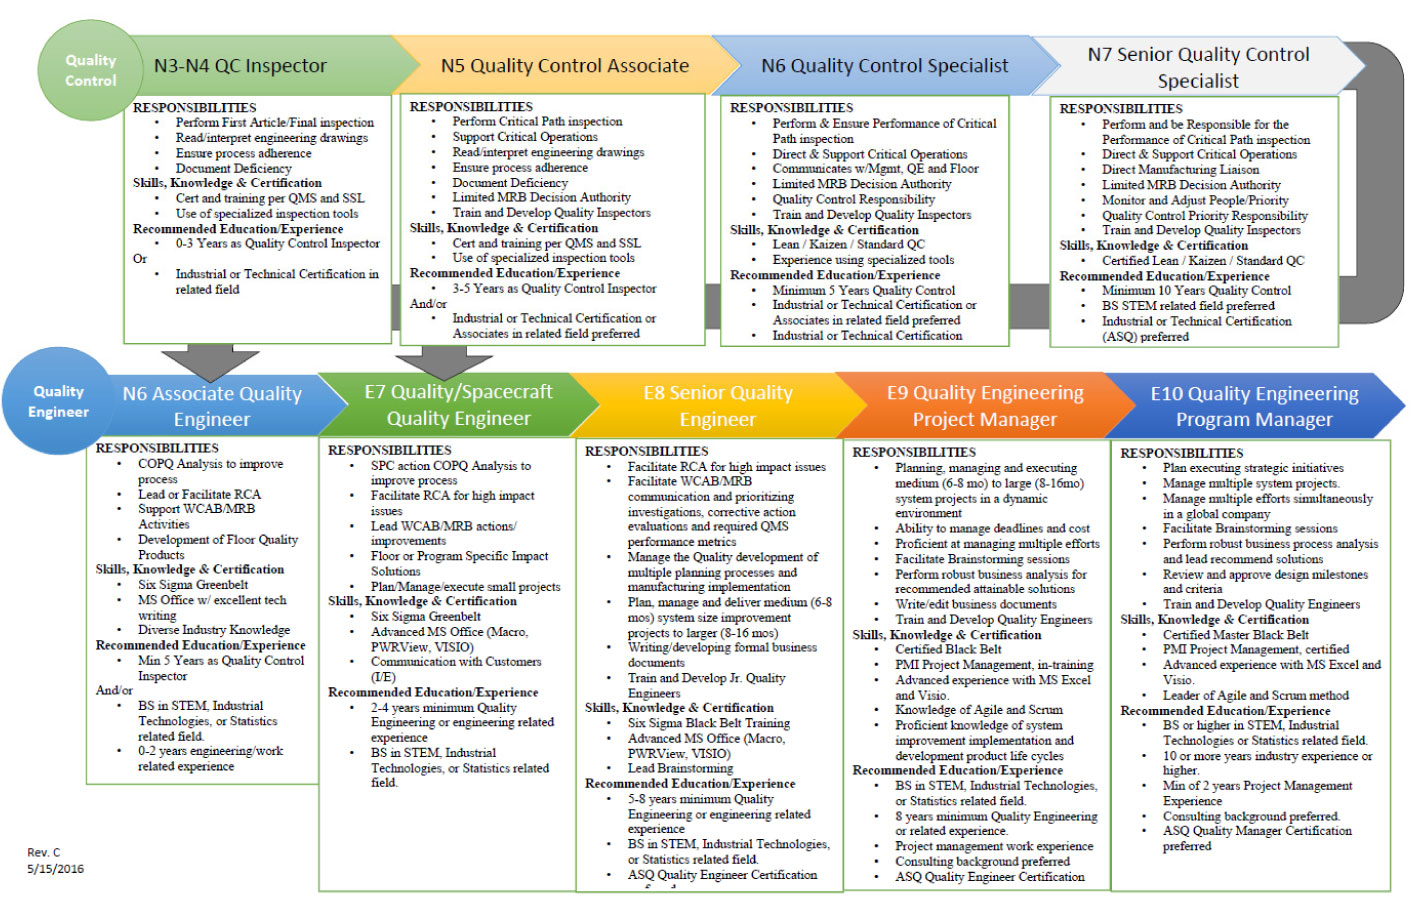 Project Roles And Responsibilities Chart